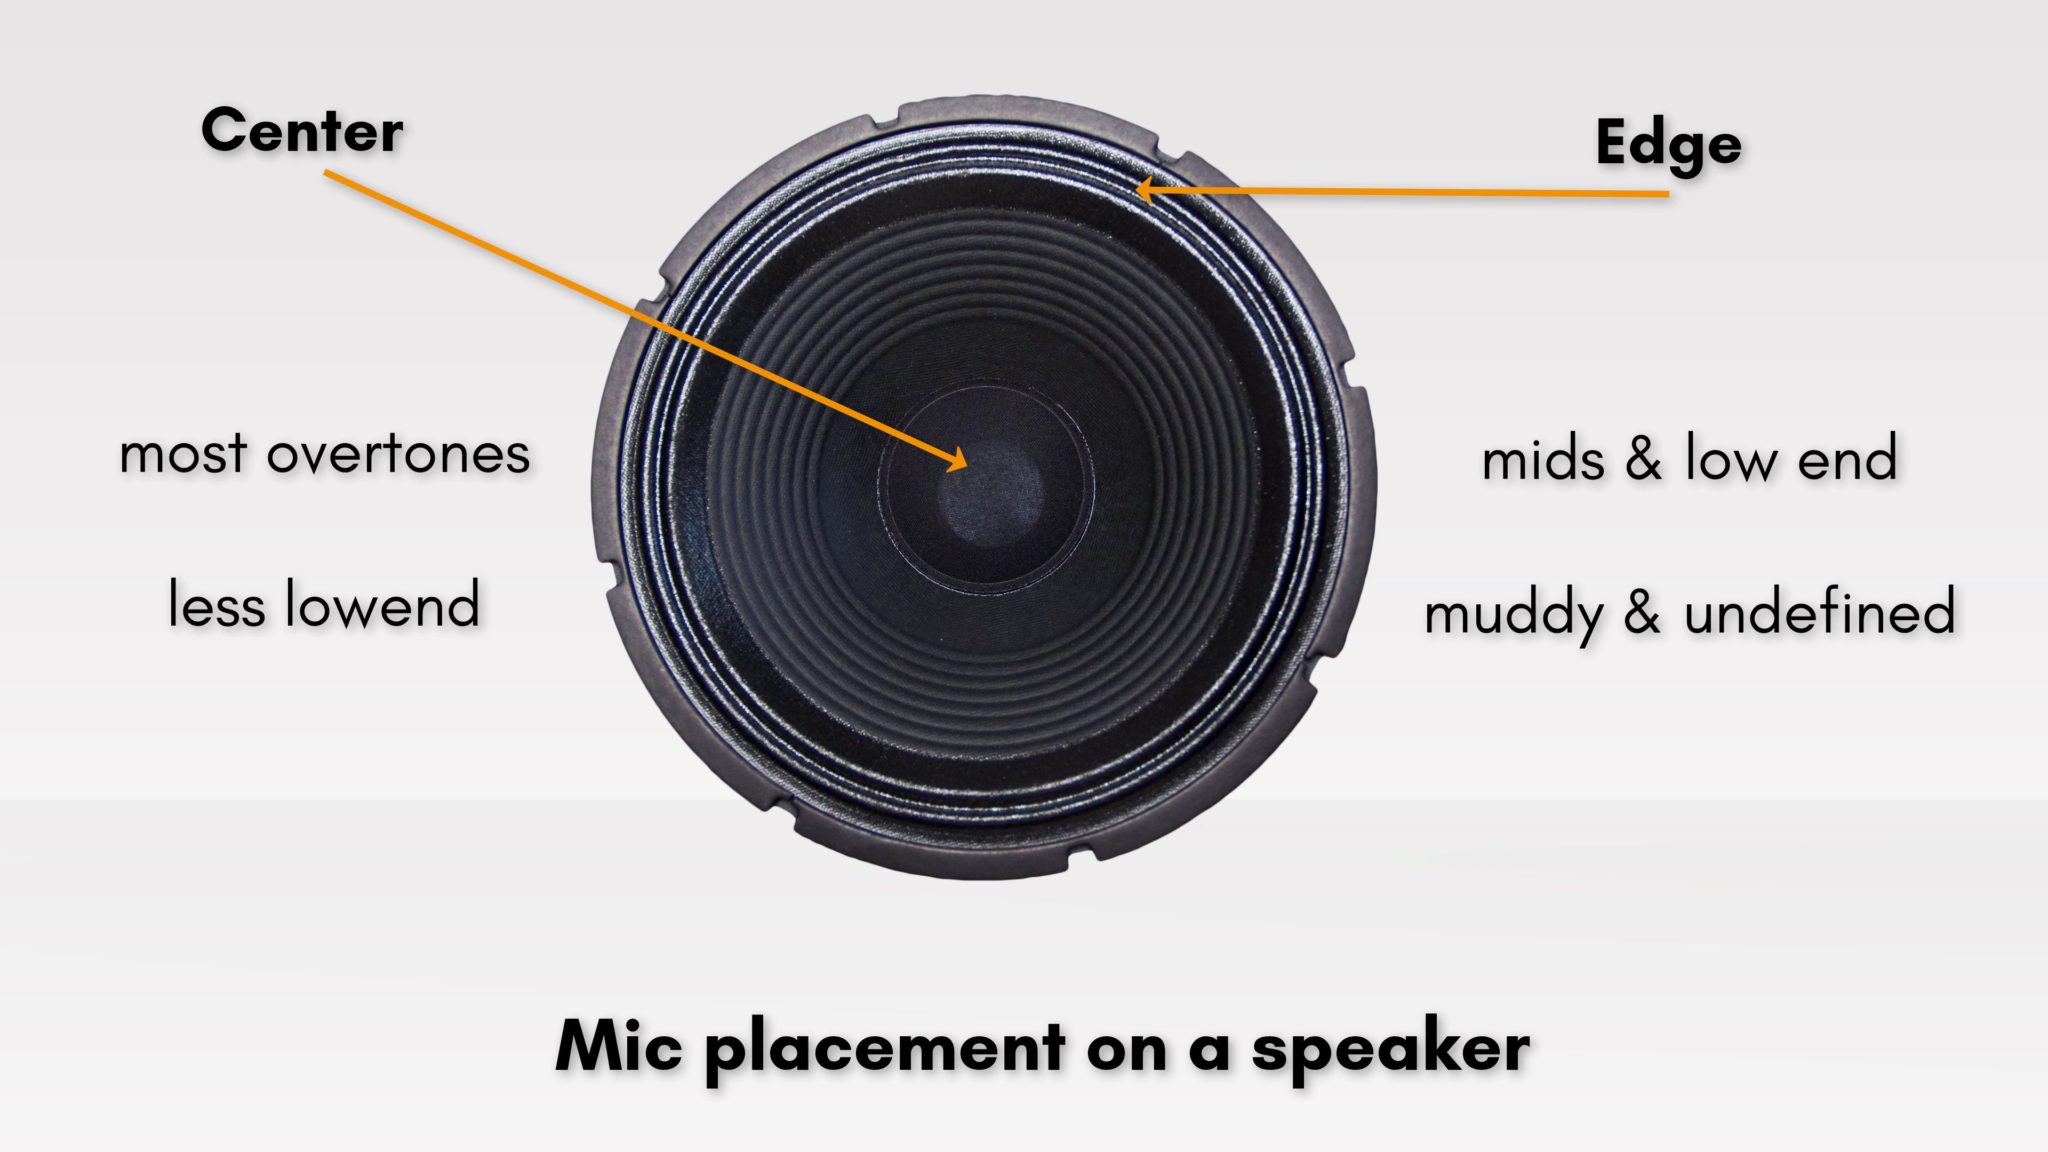 Illustration of a guitar speaker to show how different the sound is dependent on the placement. The edge has more low end, the cone more aggressive overtones.